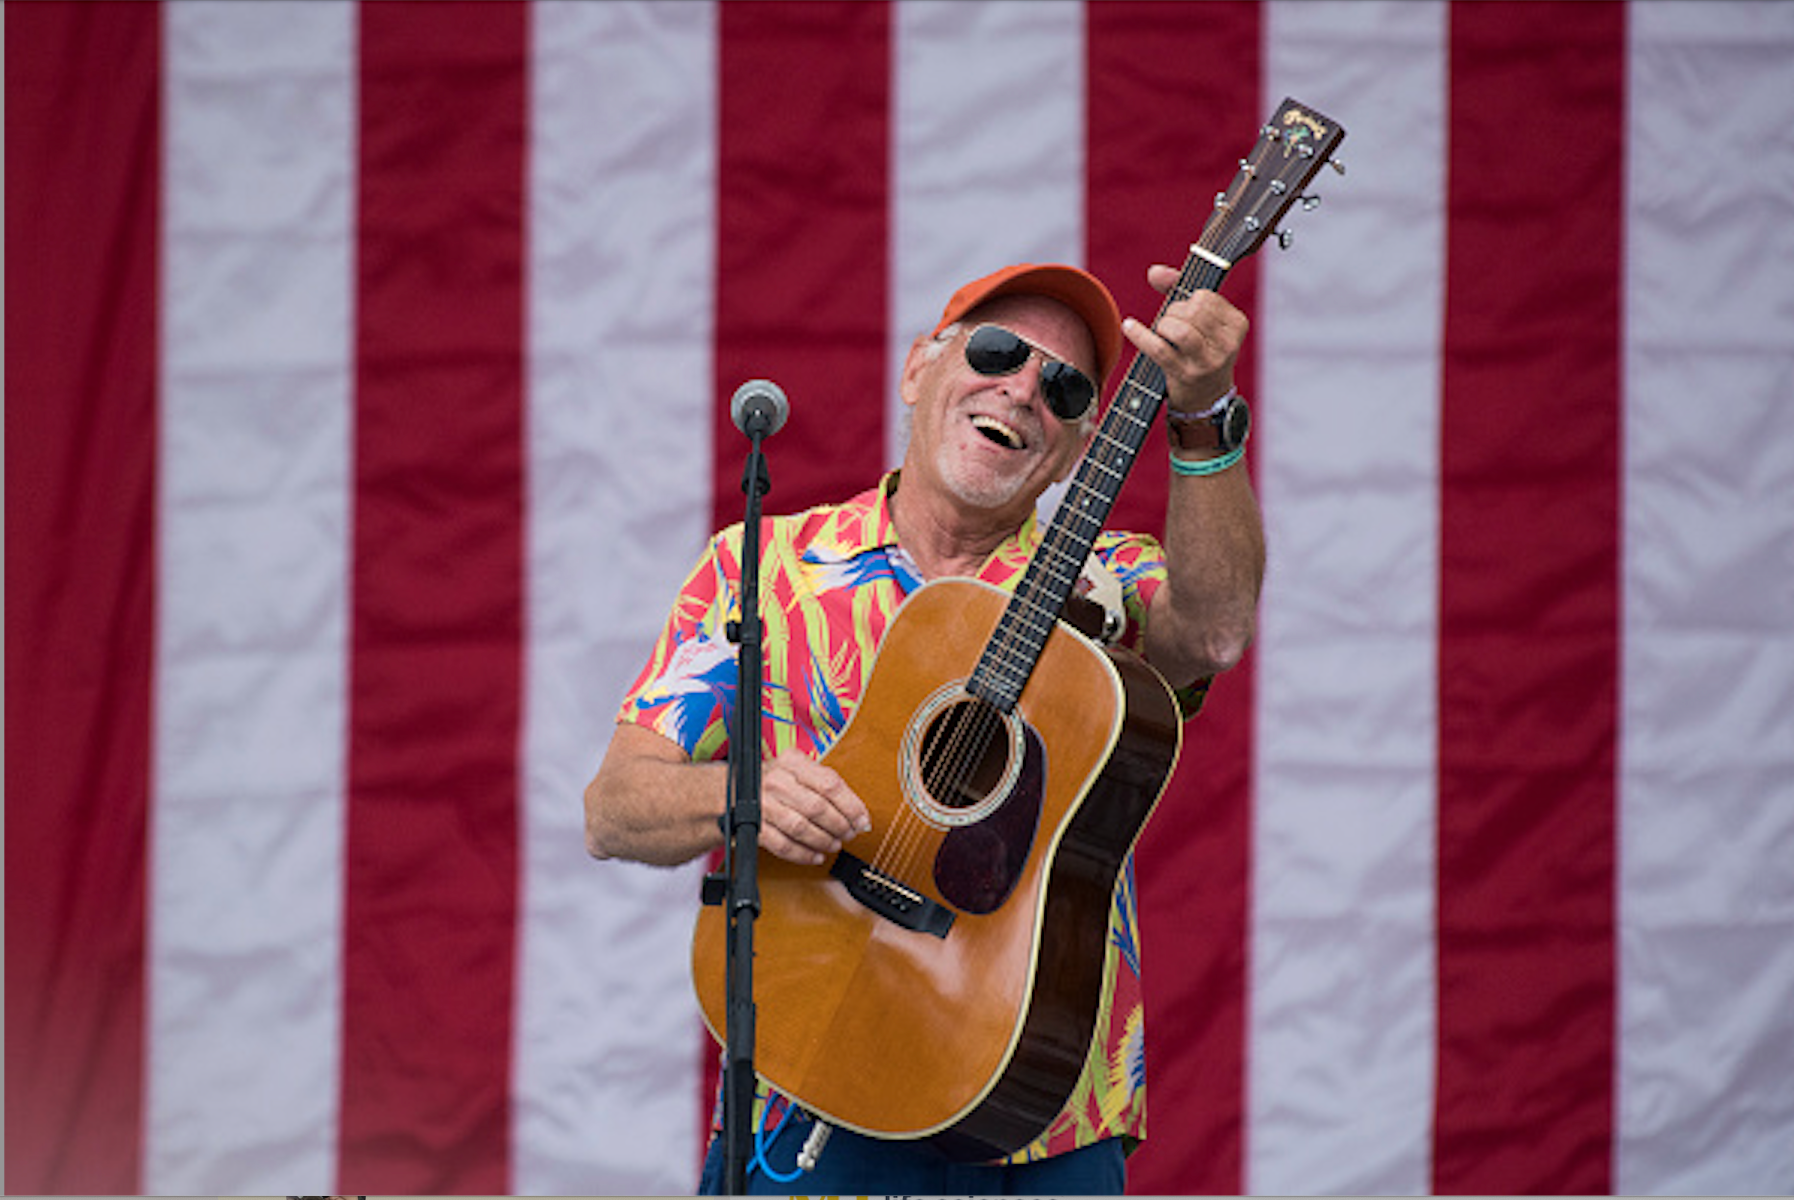 Jimmy Buffet, the "Margaritaville" singer-songwriter, died from Merkel cell carcinoma.

Tom Williams / CQ-Roll Call, Inc. via Getty Images